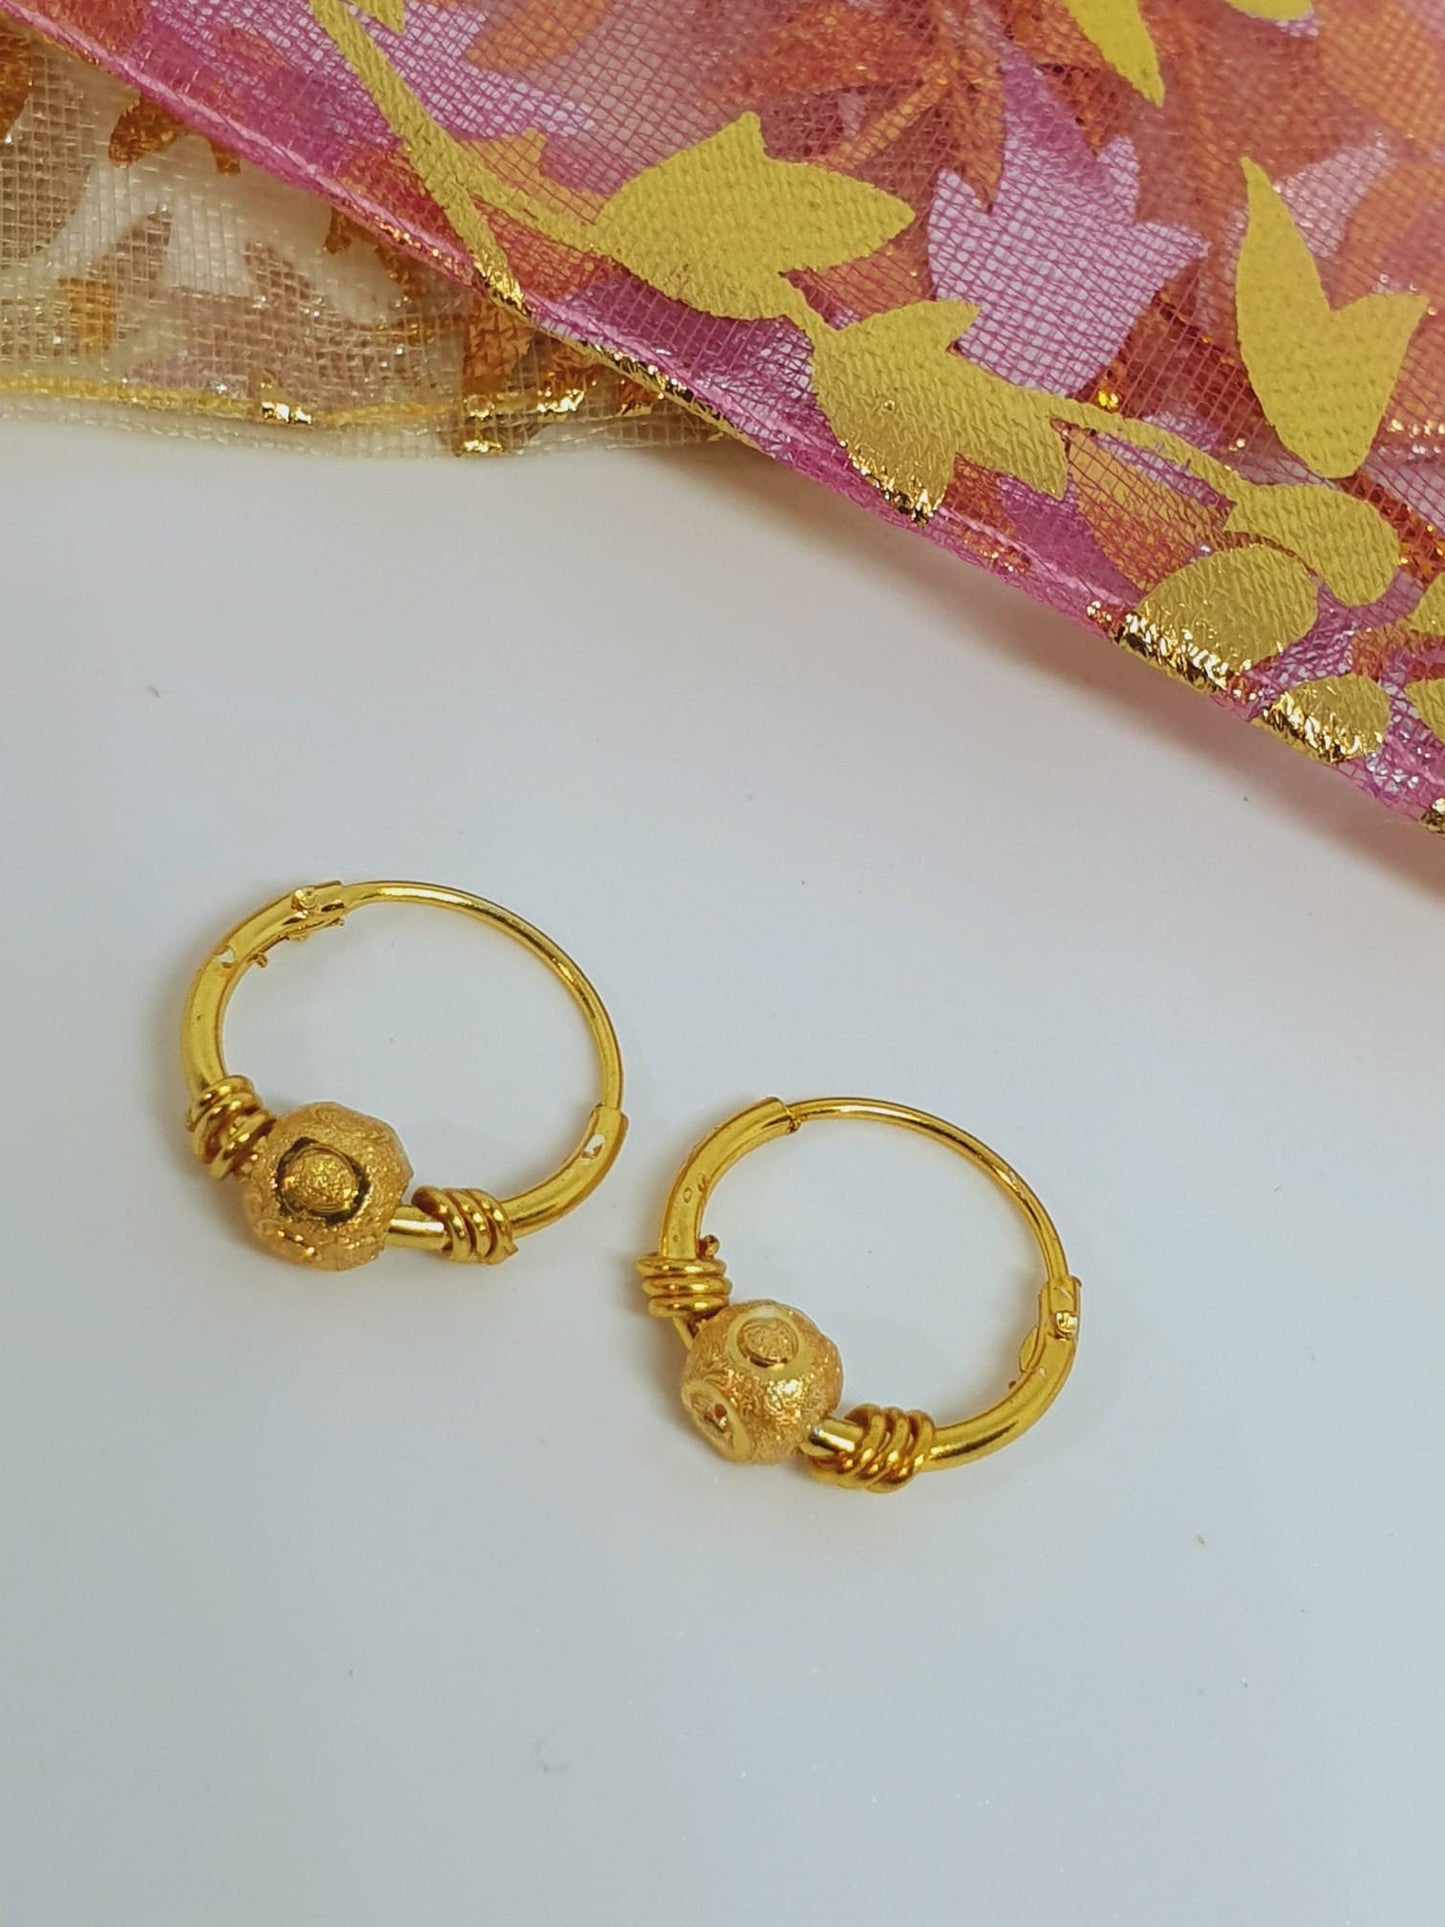 2 pieces Hoop Nose Ring Gold Bali Bollywood Wedding Indian Jewelry Women Pierced Nose